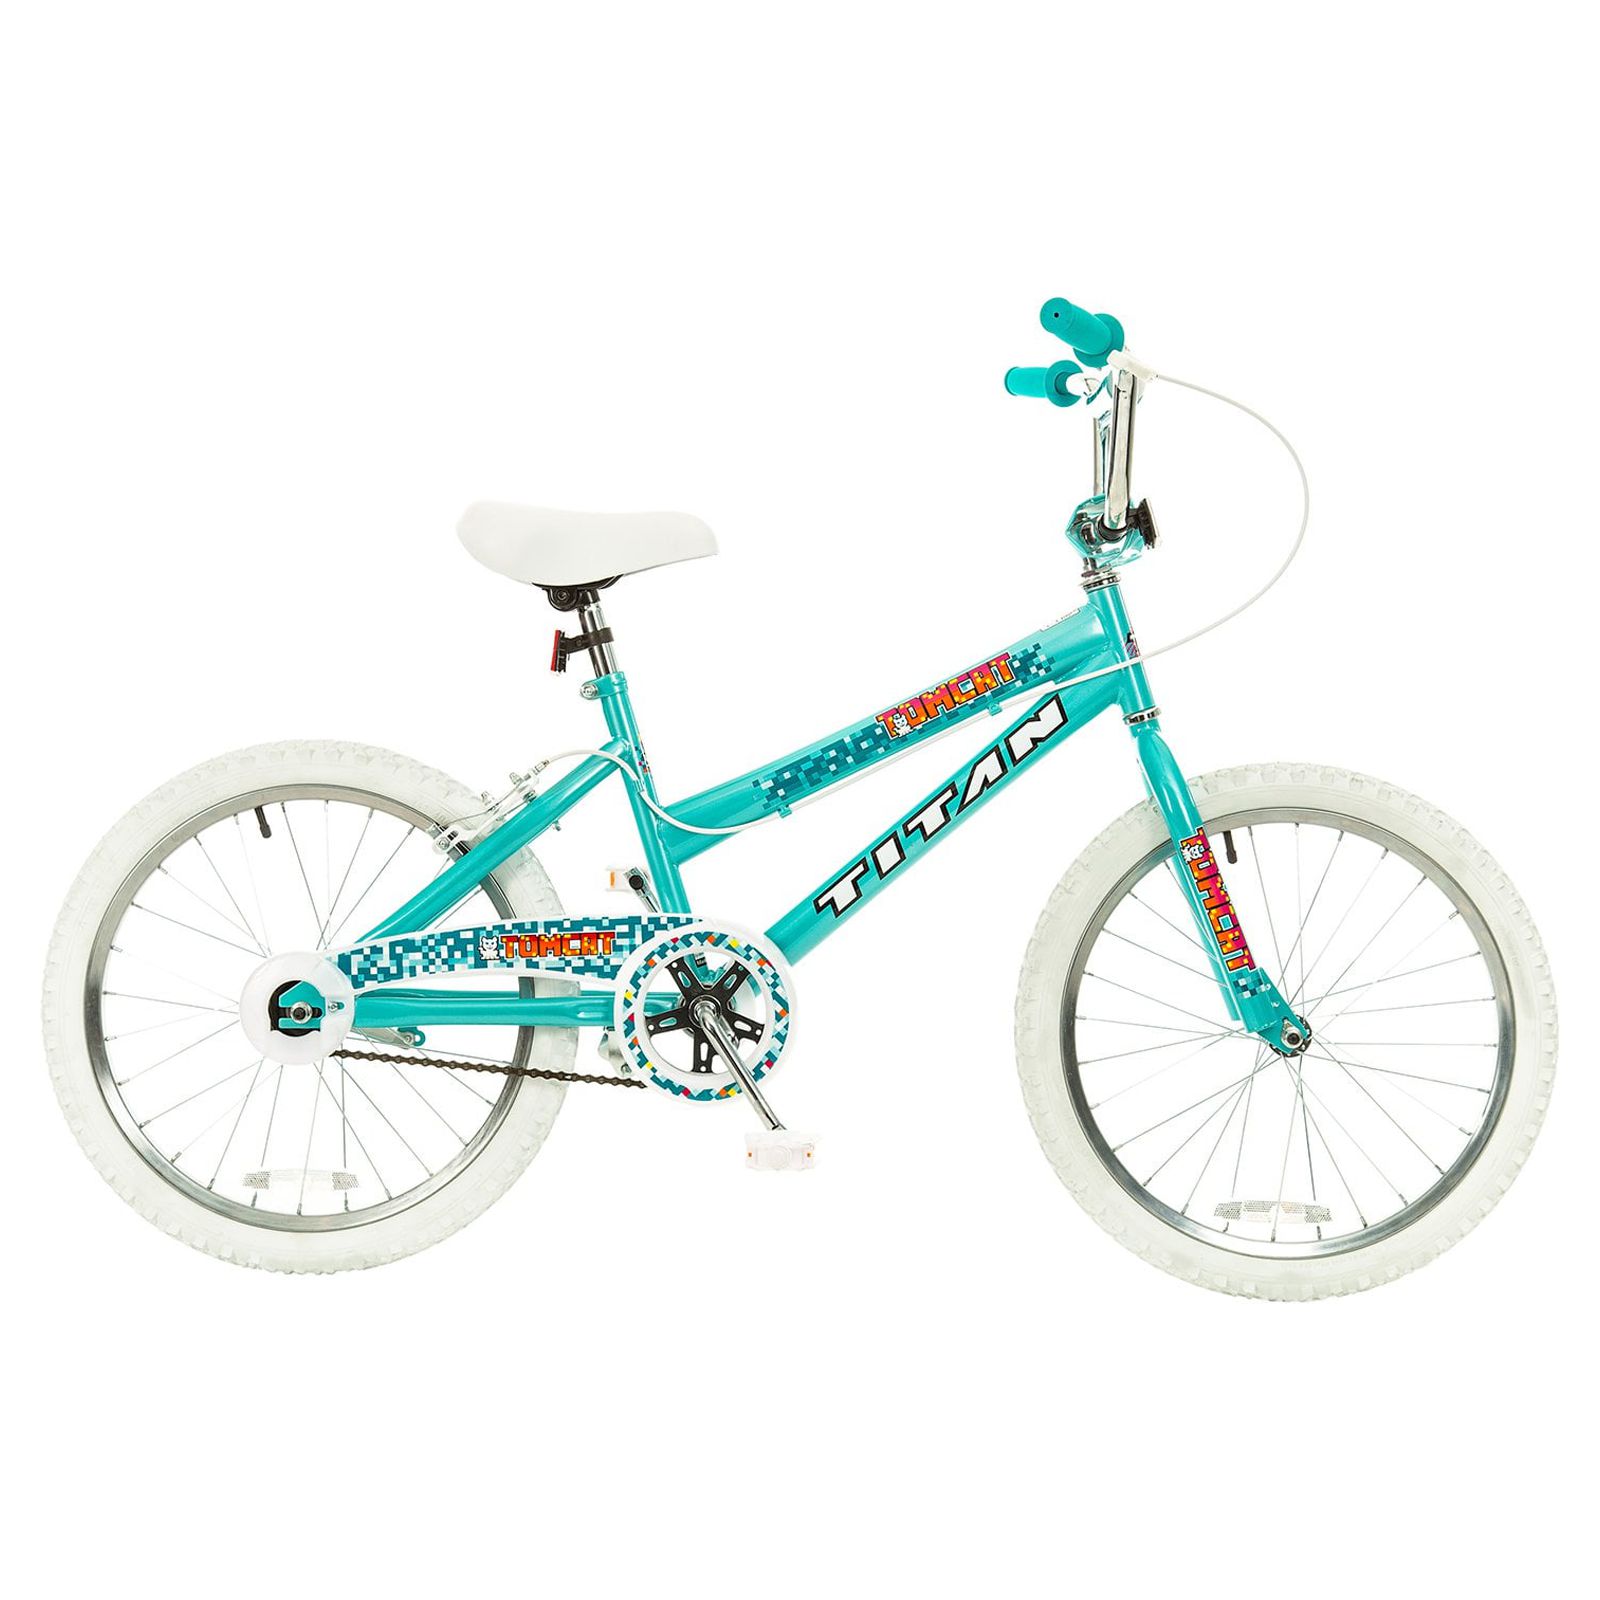 Titan 20 In. Tomcat Girls BMX Bike with Pads, Teal Blue - image 1 of 5